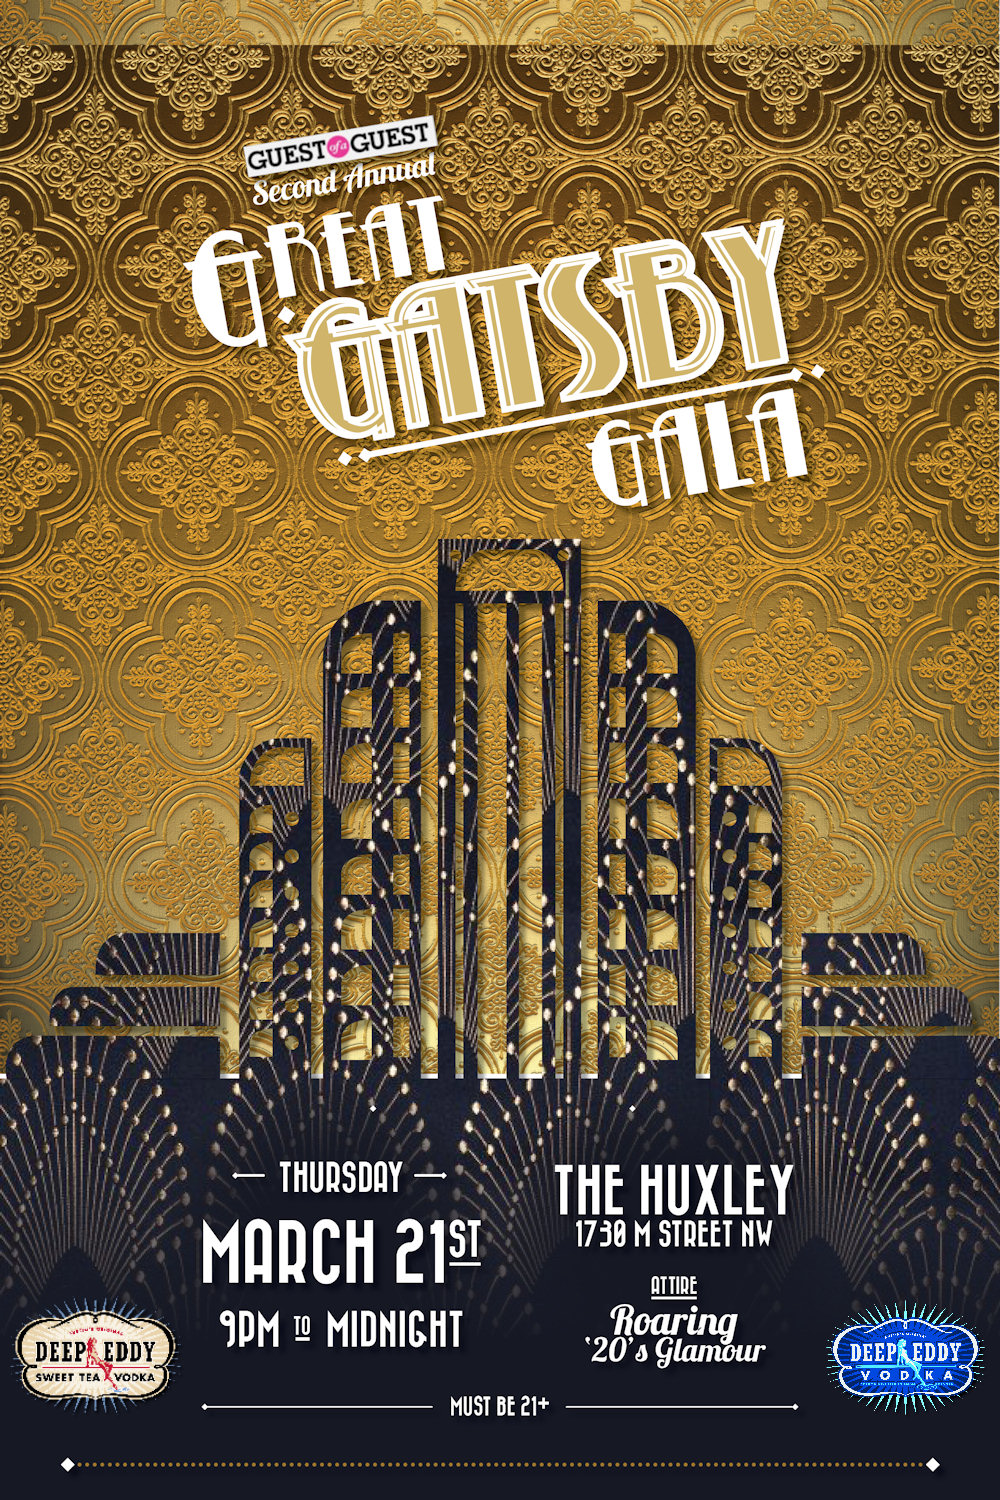 2nd Annual Great Gatsby Gala @ The Huxley | Washington | District of Columbia | United States